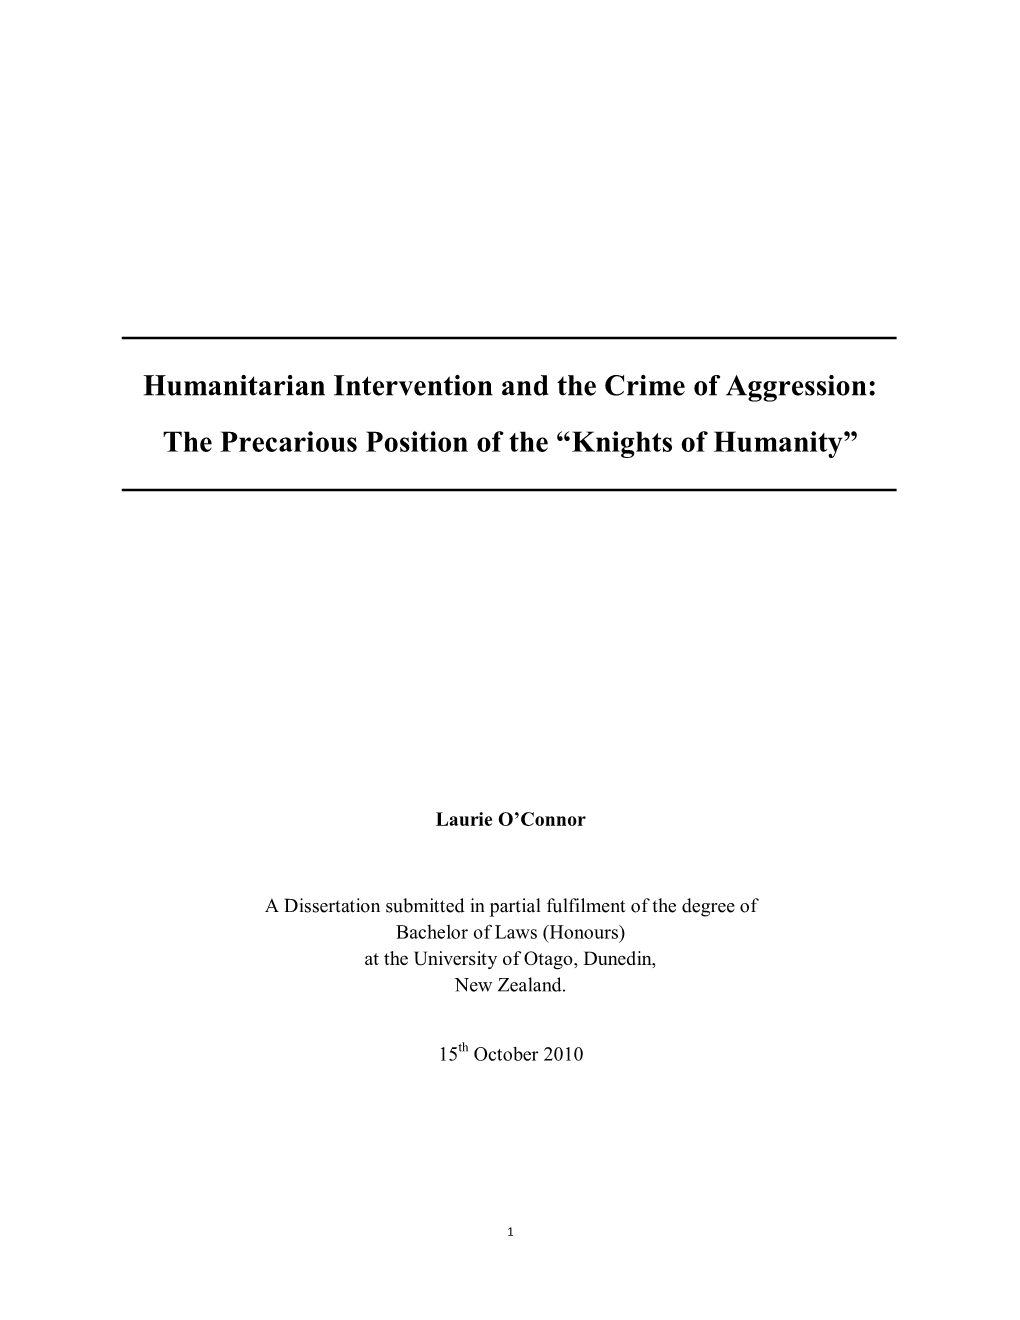 Humanitarian Intervention and the Crime of Aggression: the Precarious Position of the “Knights of Humanity”